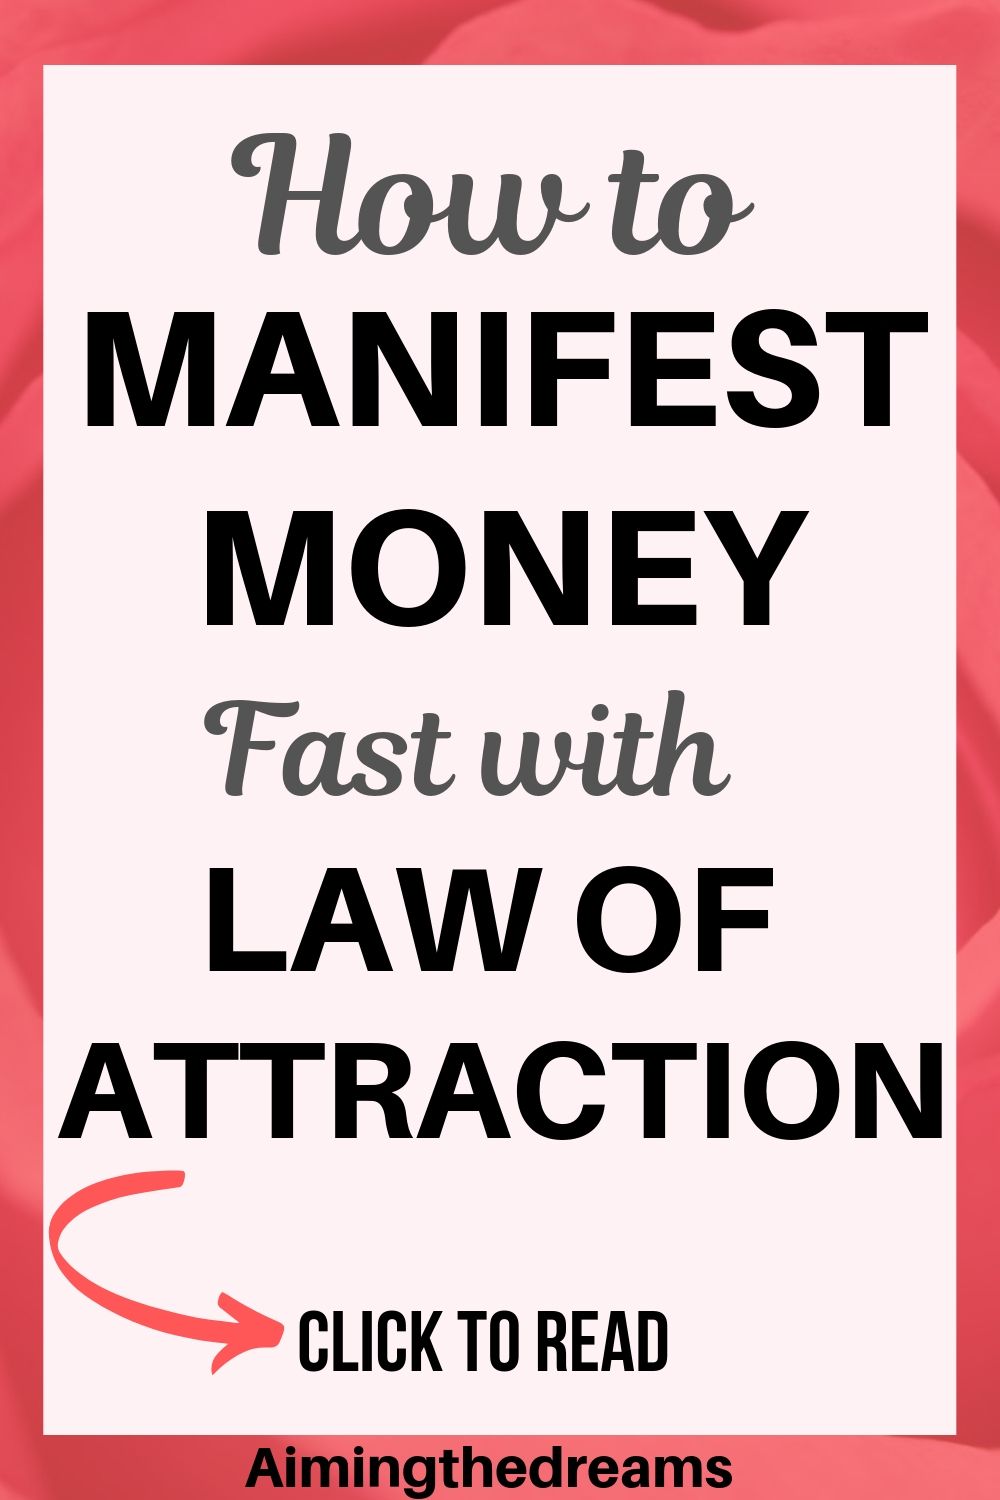 How to manifest money abundant money with law of attraction and create anundance.